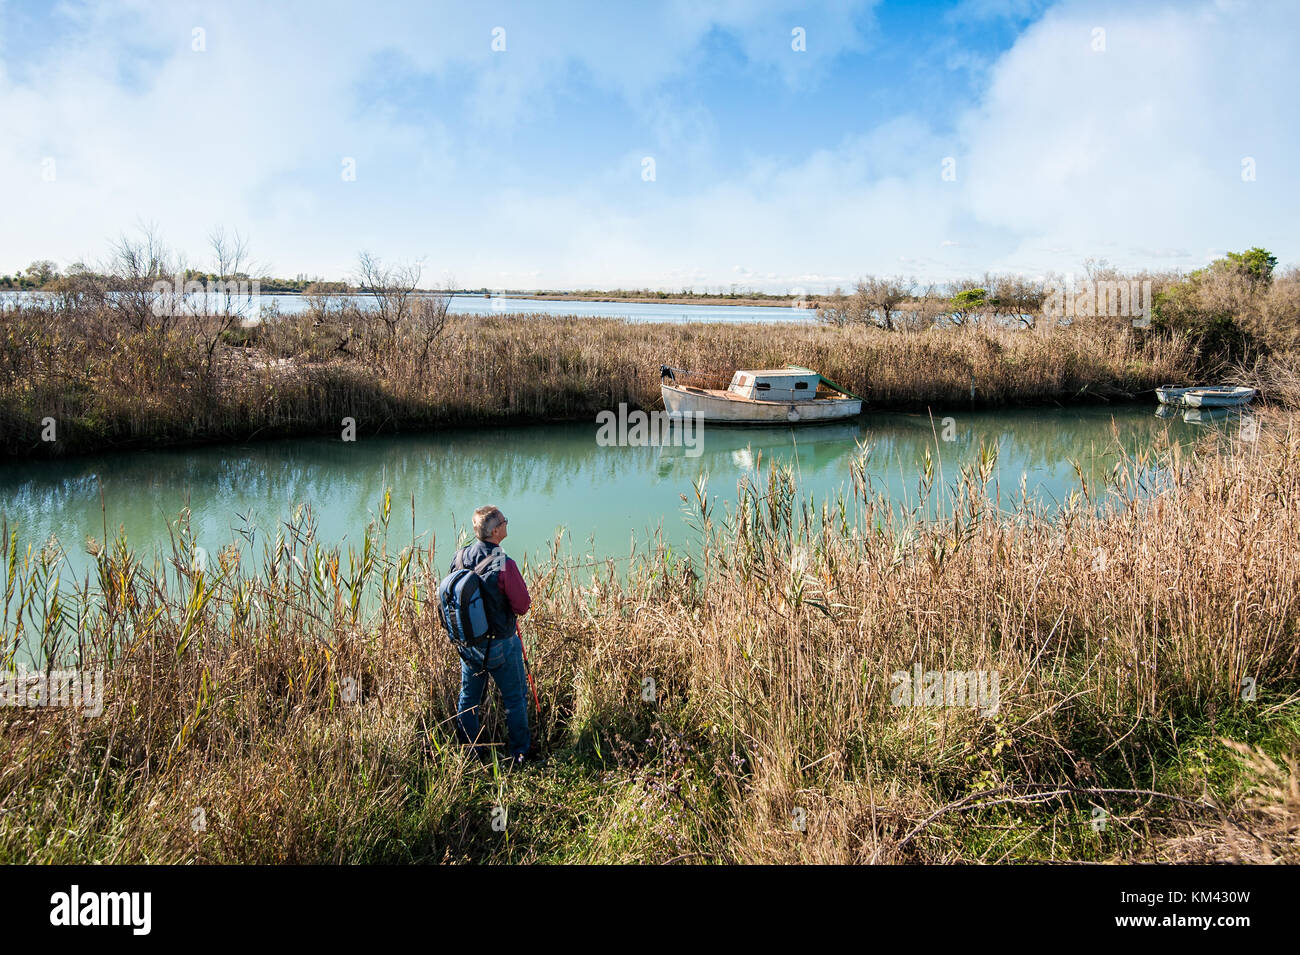 Hiker (about 60 years old) in the wild area of a lagoon. Fishing boats moored along a canal in the lagoon. Stock Photo